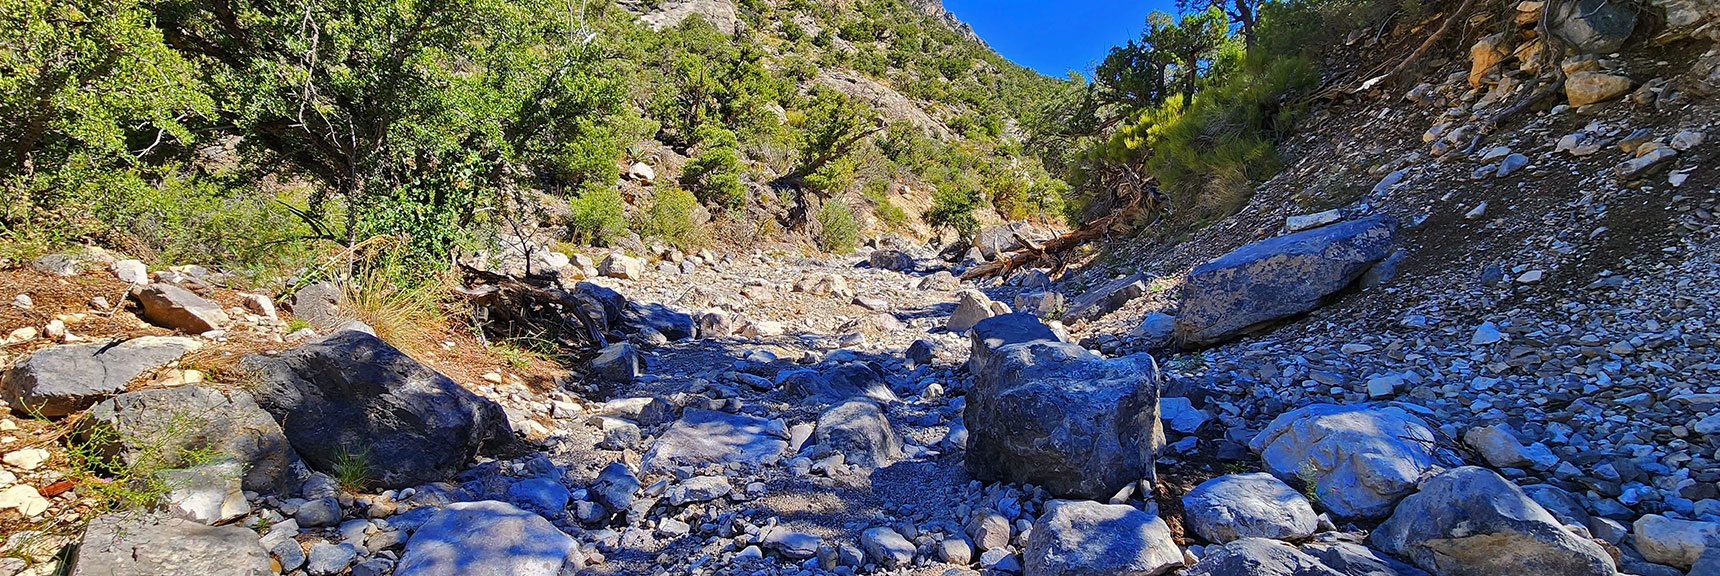 Imagine the Force of Cascading Water That Could Move Rocks of This Size! | Rocky Gap Rd to Bridge Mt Trailhead | Lovell Canyon, Nevada